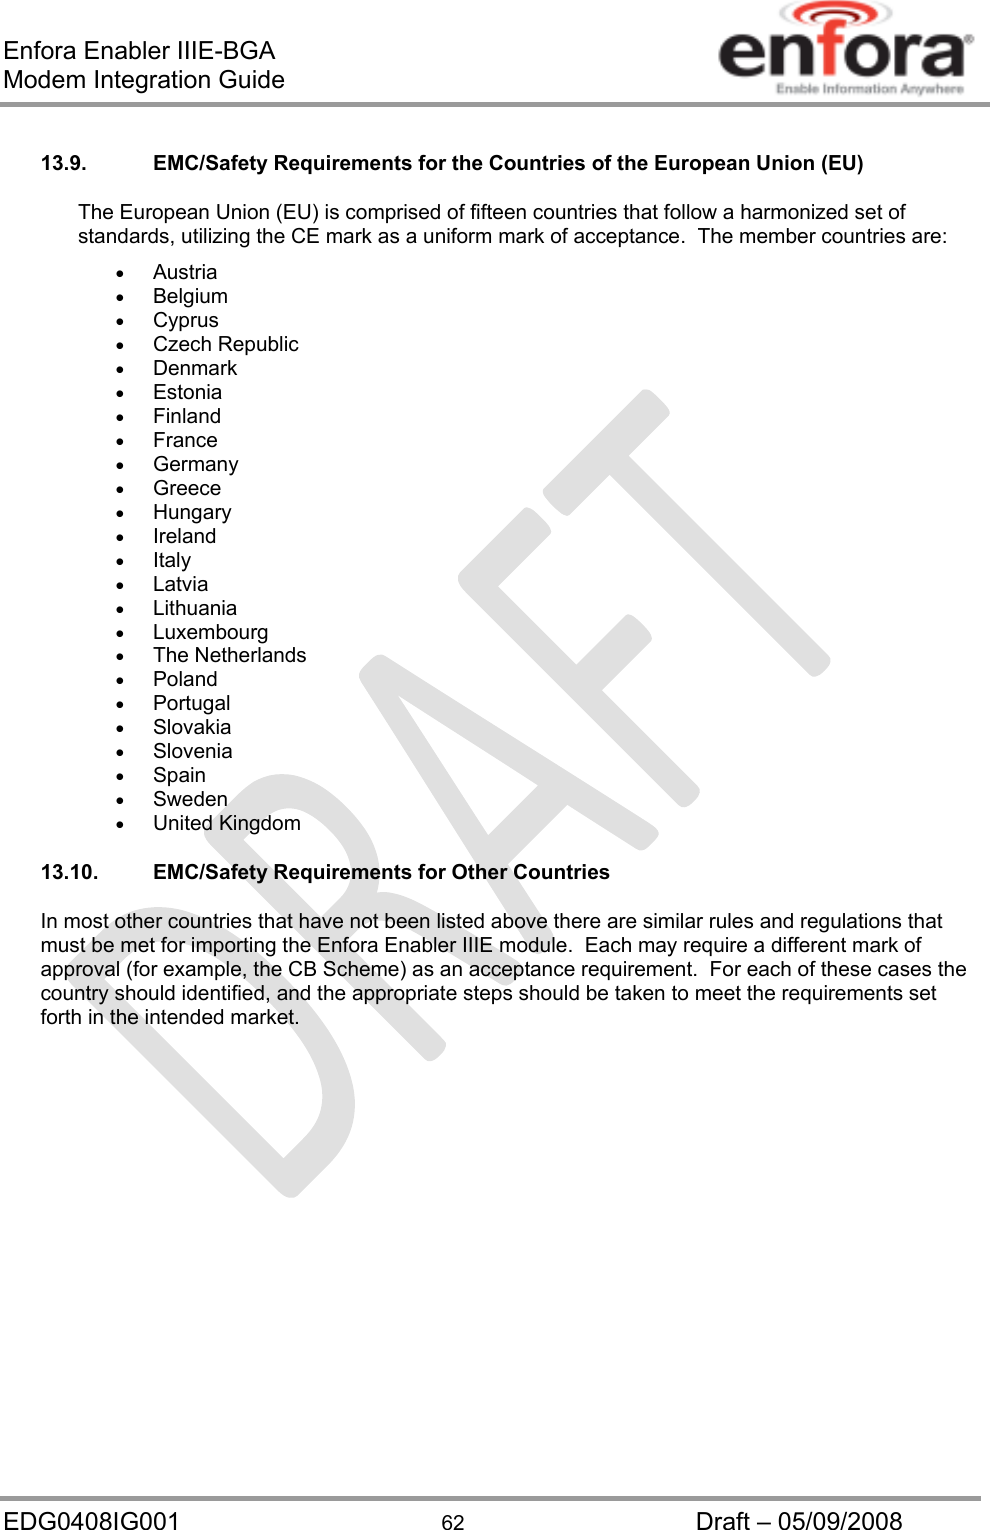 Enfora Enabler IIIE-BGA Modem Integration Guide EDG0408IG001  62  Draft – 05/09/2008 13.9.  EMC/Safety Requirements for the Countries of the European Union (EU) The European Union (EU) is comprised of fifteen countries that follow a harmonized set of standards, utilizing the CE mark as a uniform mark of acceptance.  The member countries are:  Austria  Belgium  Cyprus  Czech Republic  Denmark  Estonia  Finland  France  Germany  Greece  Hungary  Ireland  Italy  Latvia  Lithuania  Luxembourg  The Netherlands  Poland  Portugal  Slovakia  Slovenia  Spain  Sweden  United Kingdom 13.10. EMC/Safety Requirements for Other Countries In most other countries that have not been listed above there are similar rules and regulations that must be met for importing the Enfora Enabler IIIE module.  Each may require a different mark of approval (for example, the CB Scheme) as an acceptance requirement.  For each of these cases the country should identified, and the appropriate steps should be taken to meet the requirements set forth in the intended market. 